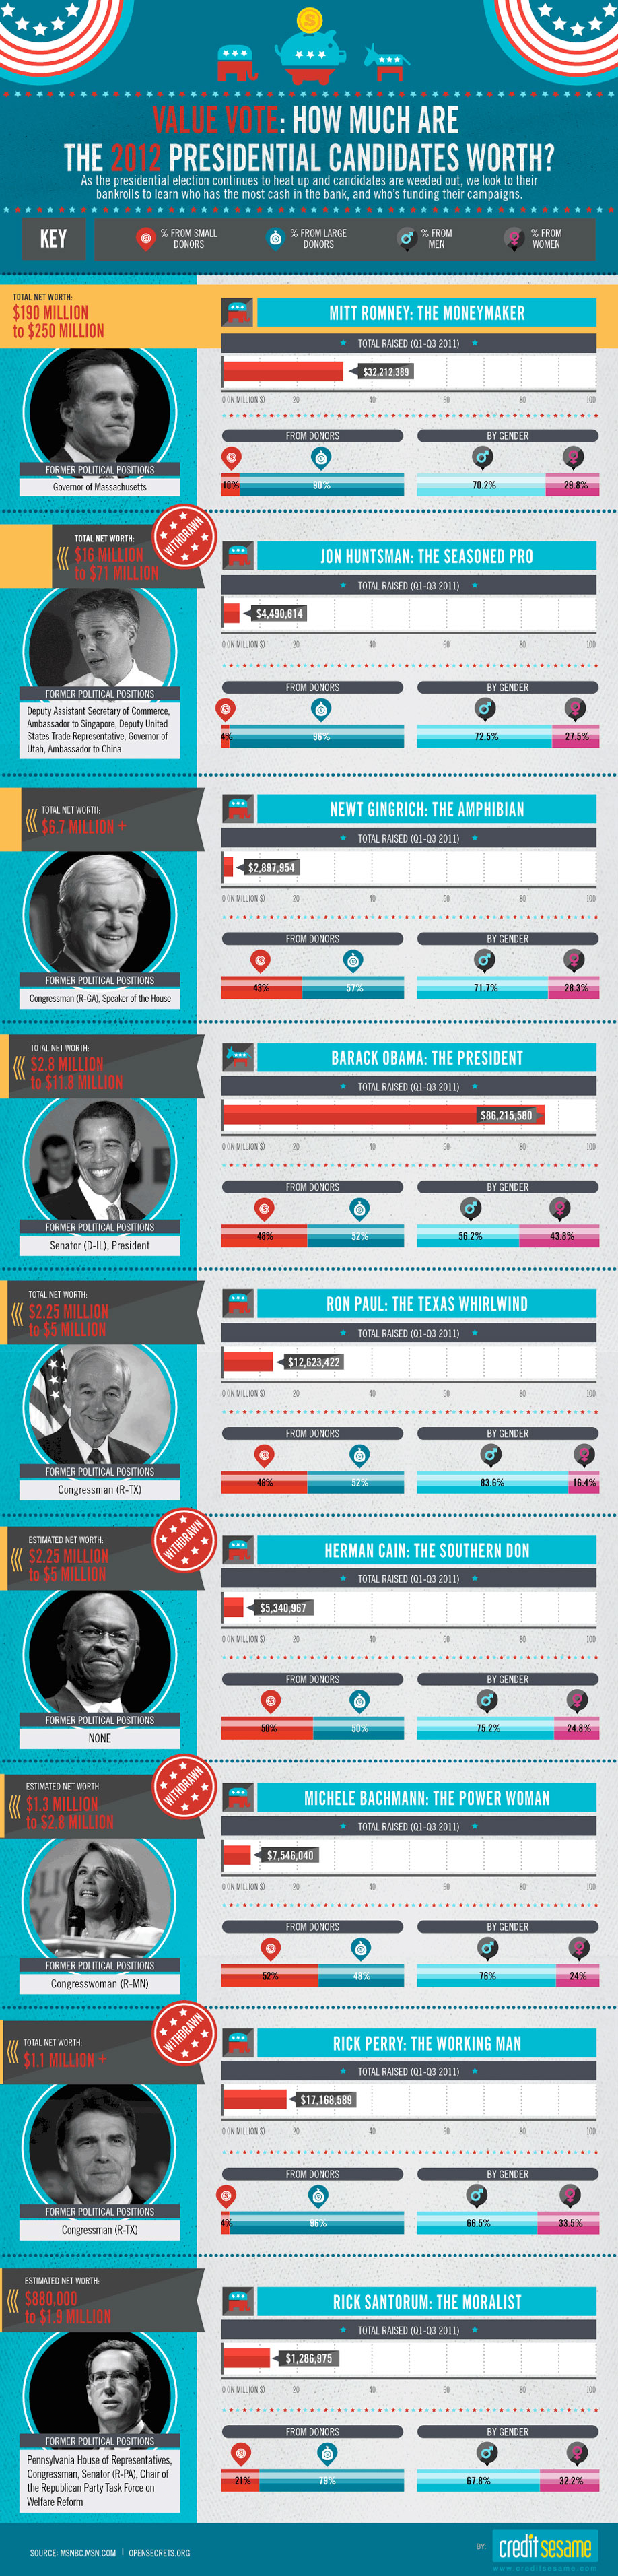 How Much Are The 2012 Presidential Candidates Worth?